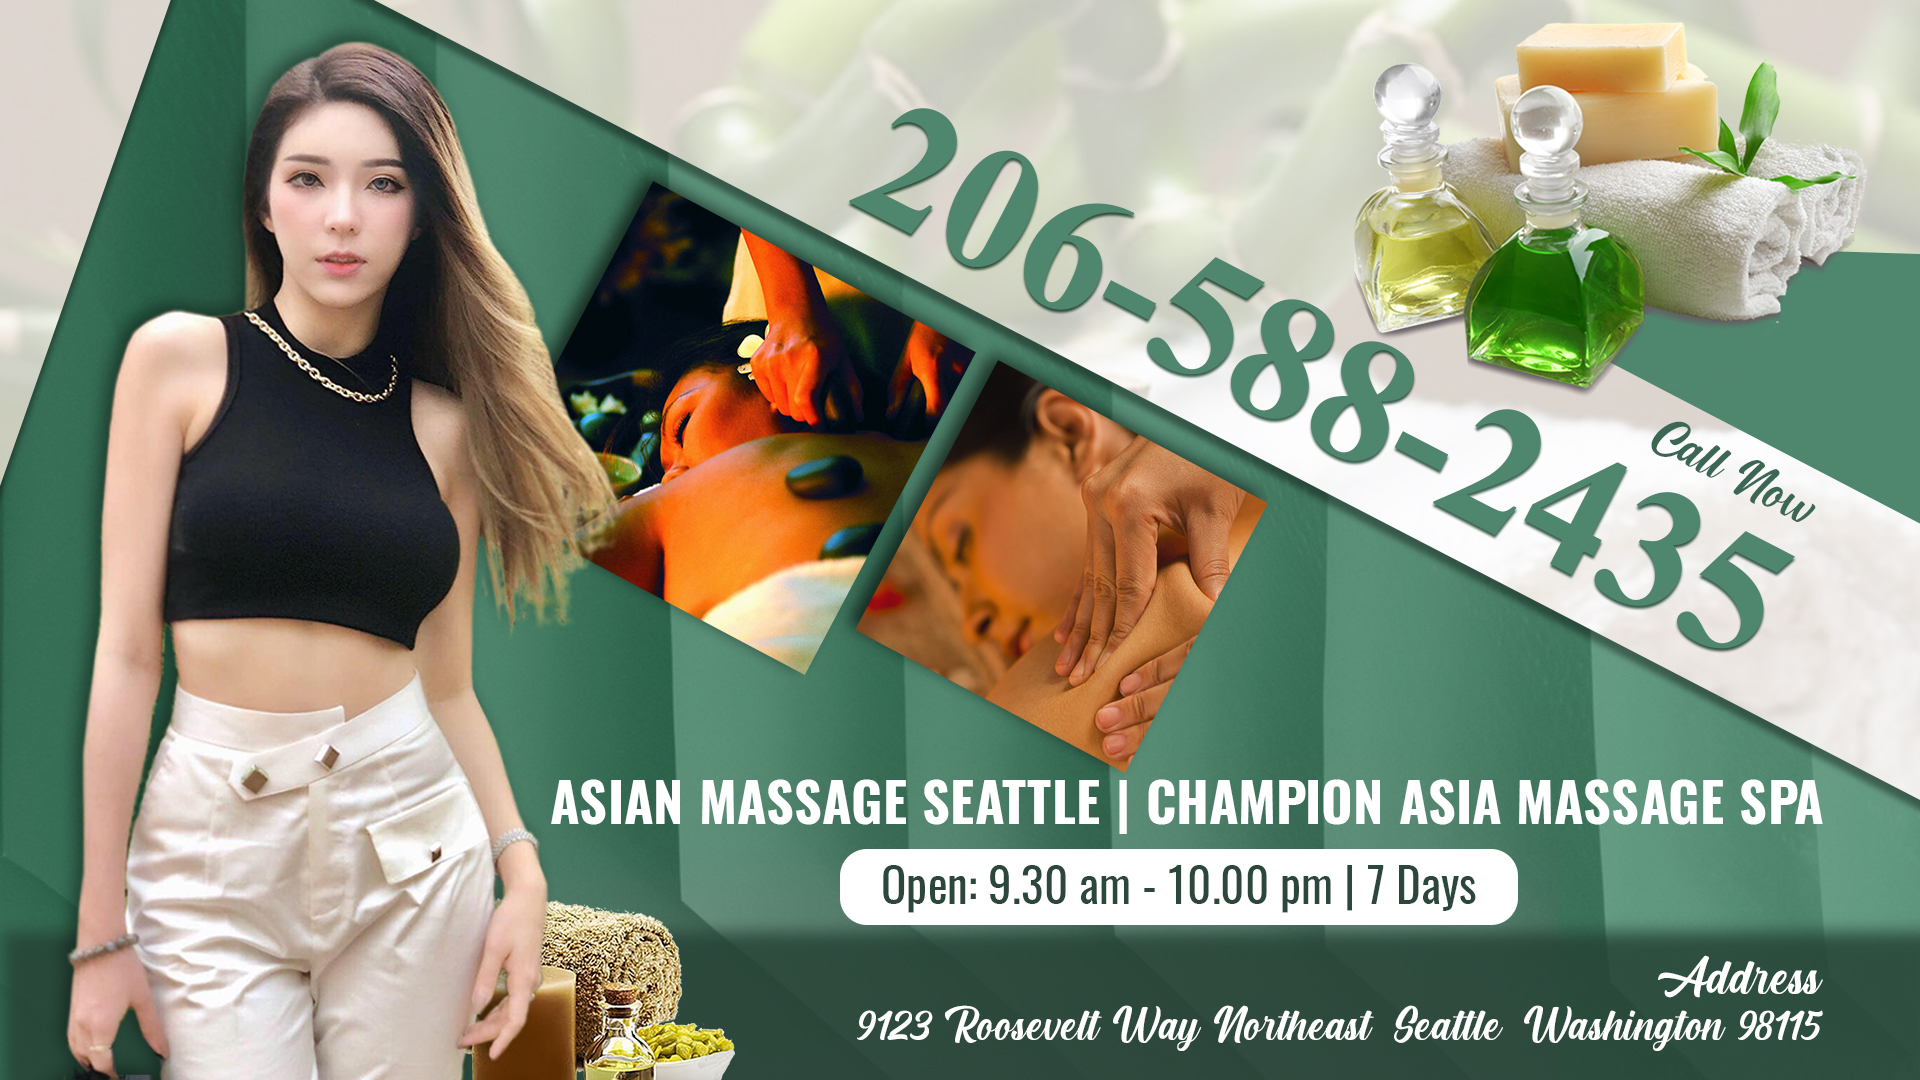 Asian Massage Seattle | Champion Asia Massage Spa on Twitter: "If you are overwhelmed with work, there's no better place to visit than the Champion Asia Massage, for a body relaxing